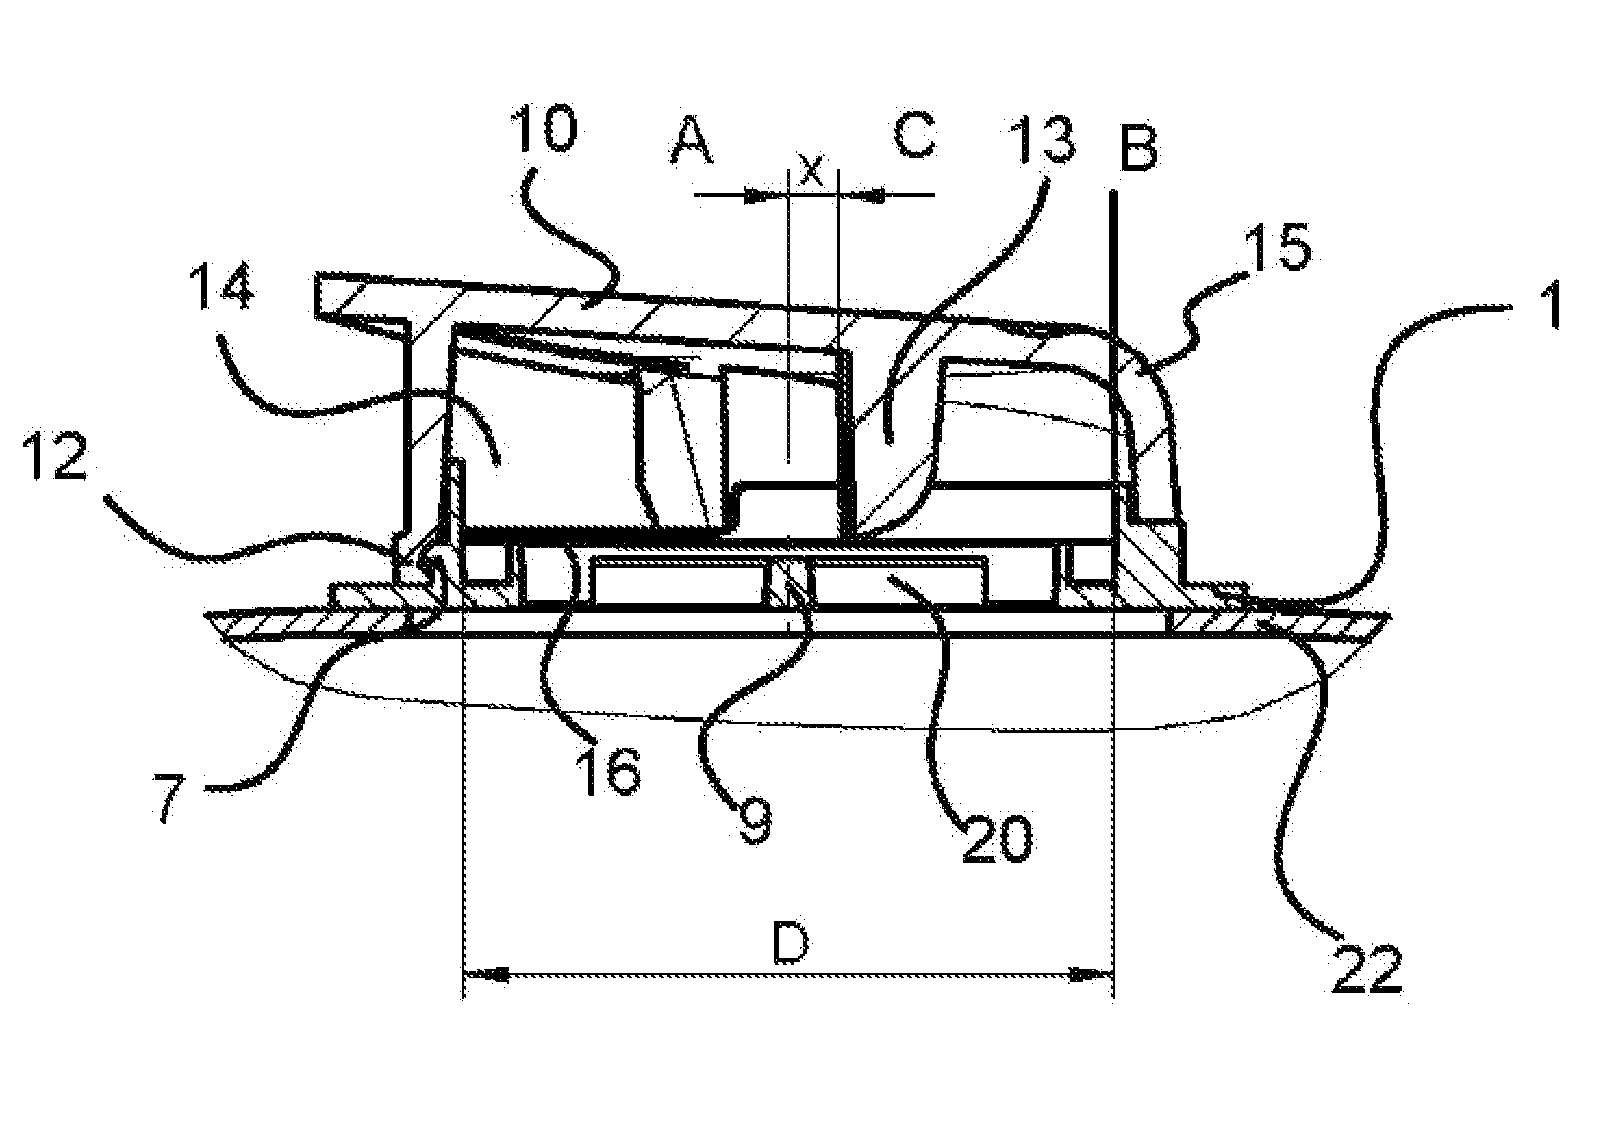 Directional valve and breathing mask with a directional valve